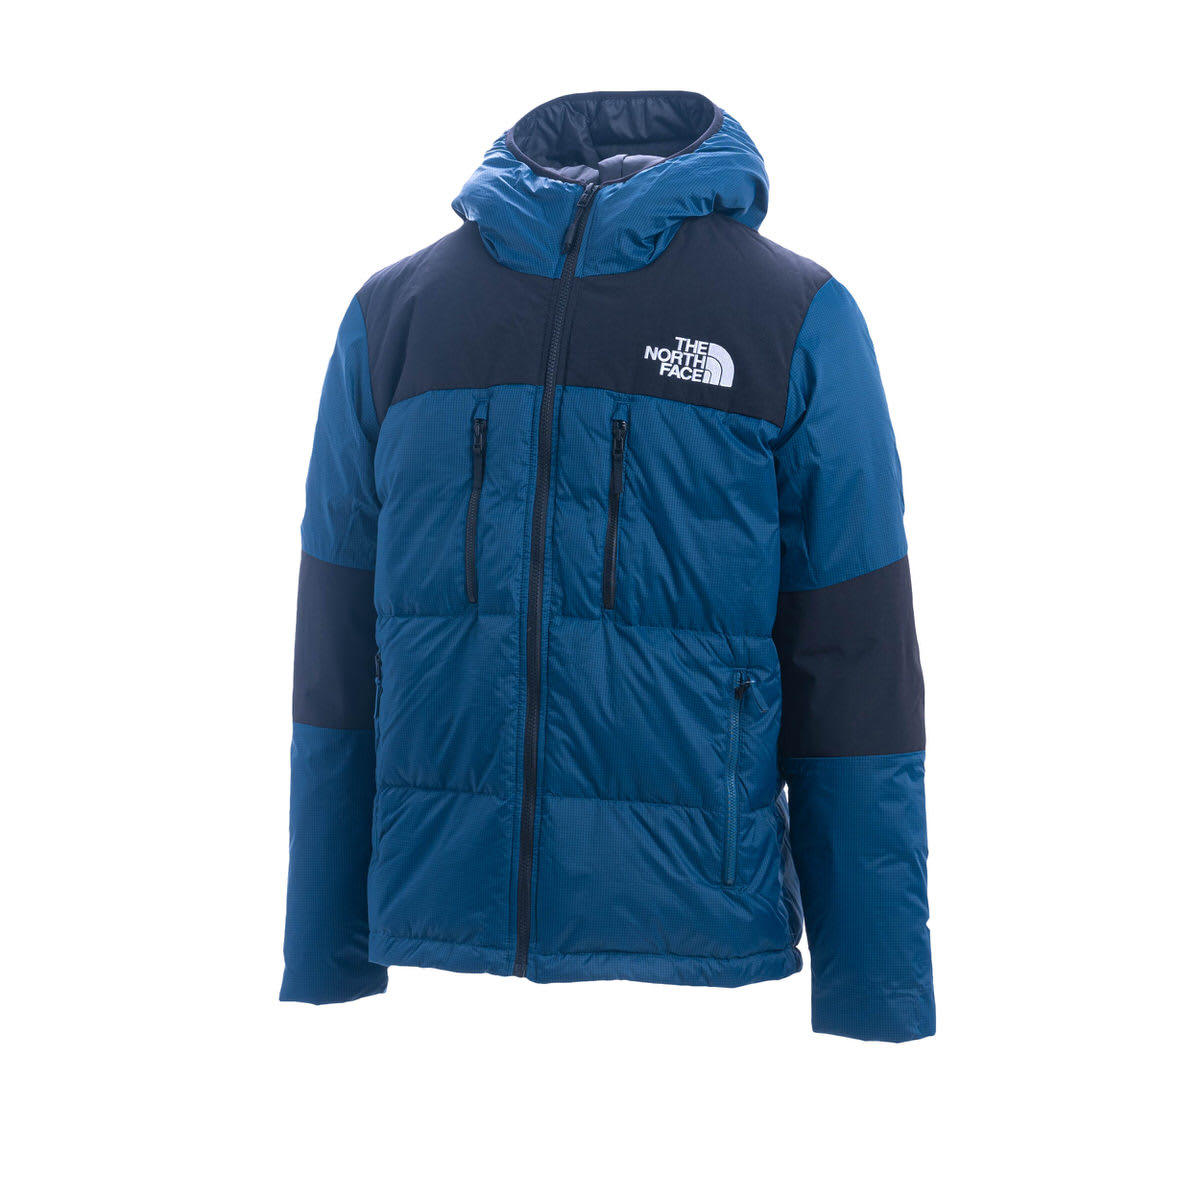 The North Face The North Face himalayan Light Jacket